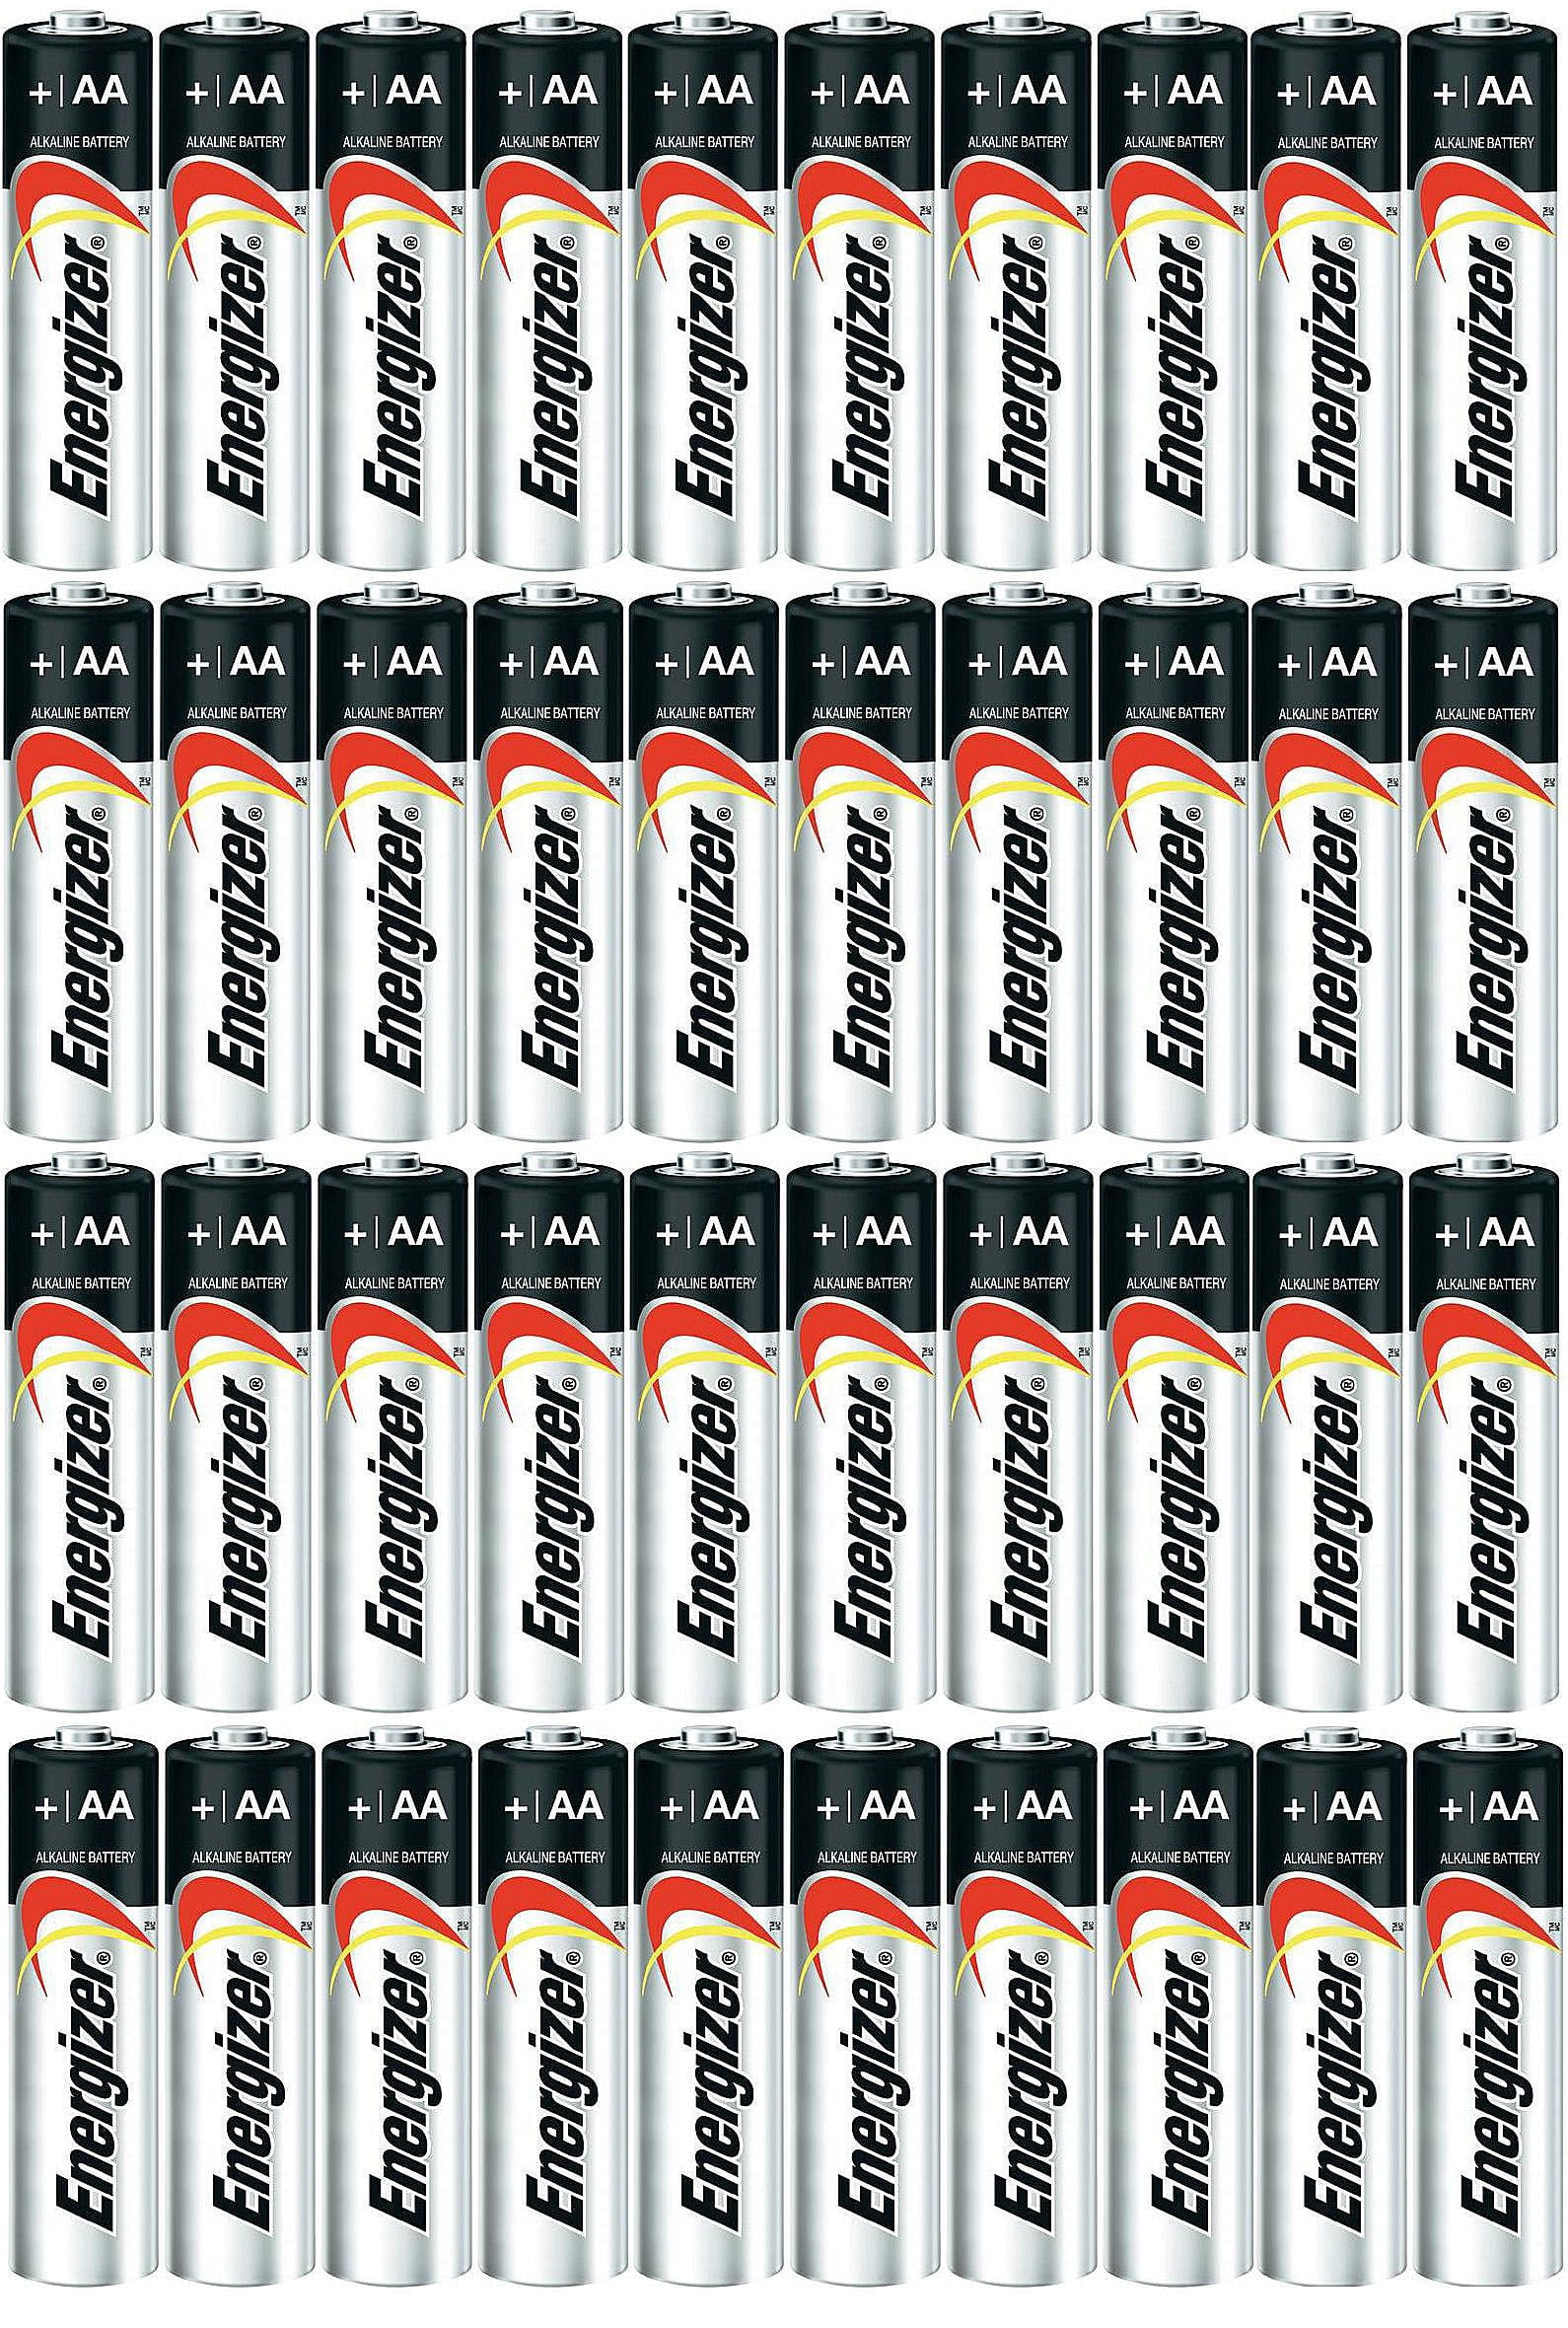 Energizer AA Max Alkaline E91 Batteries Made in USA - Expiration 12/2024 or  later - 40 count